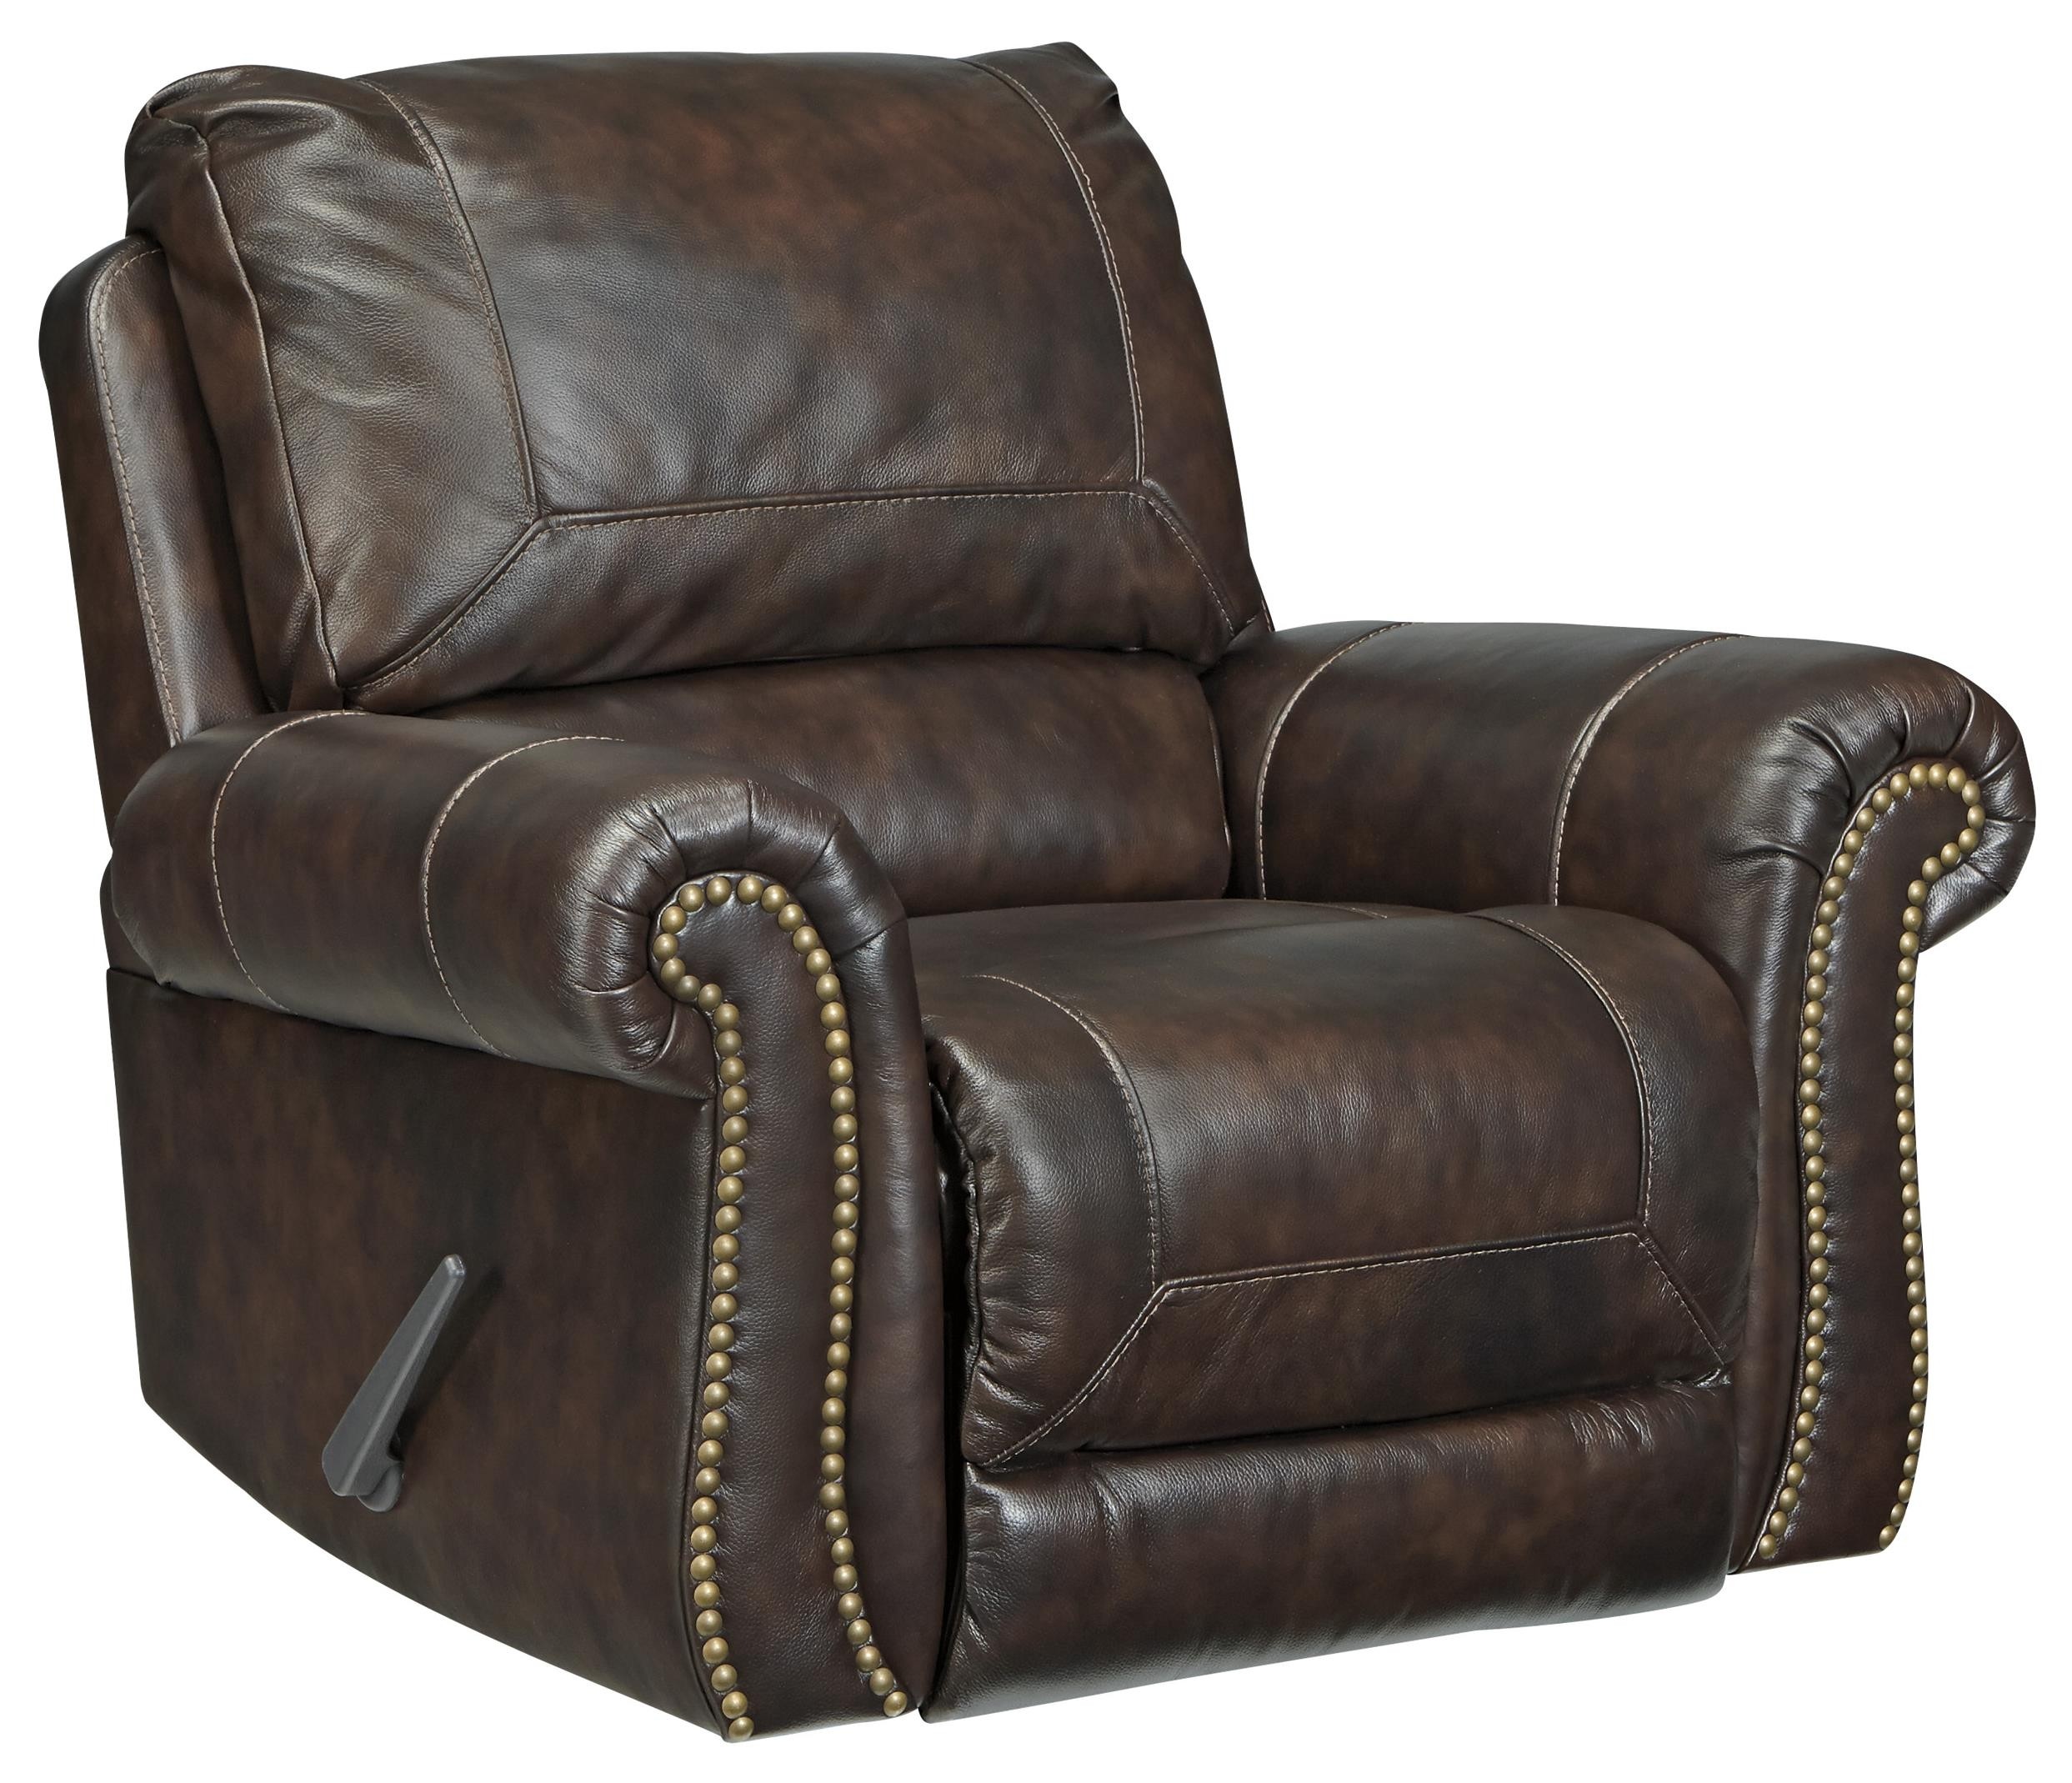 Bristan traditional leather match rocker recliner with